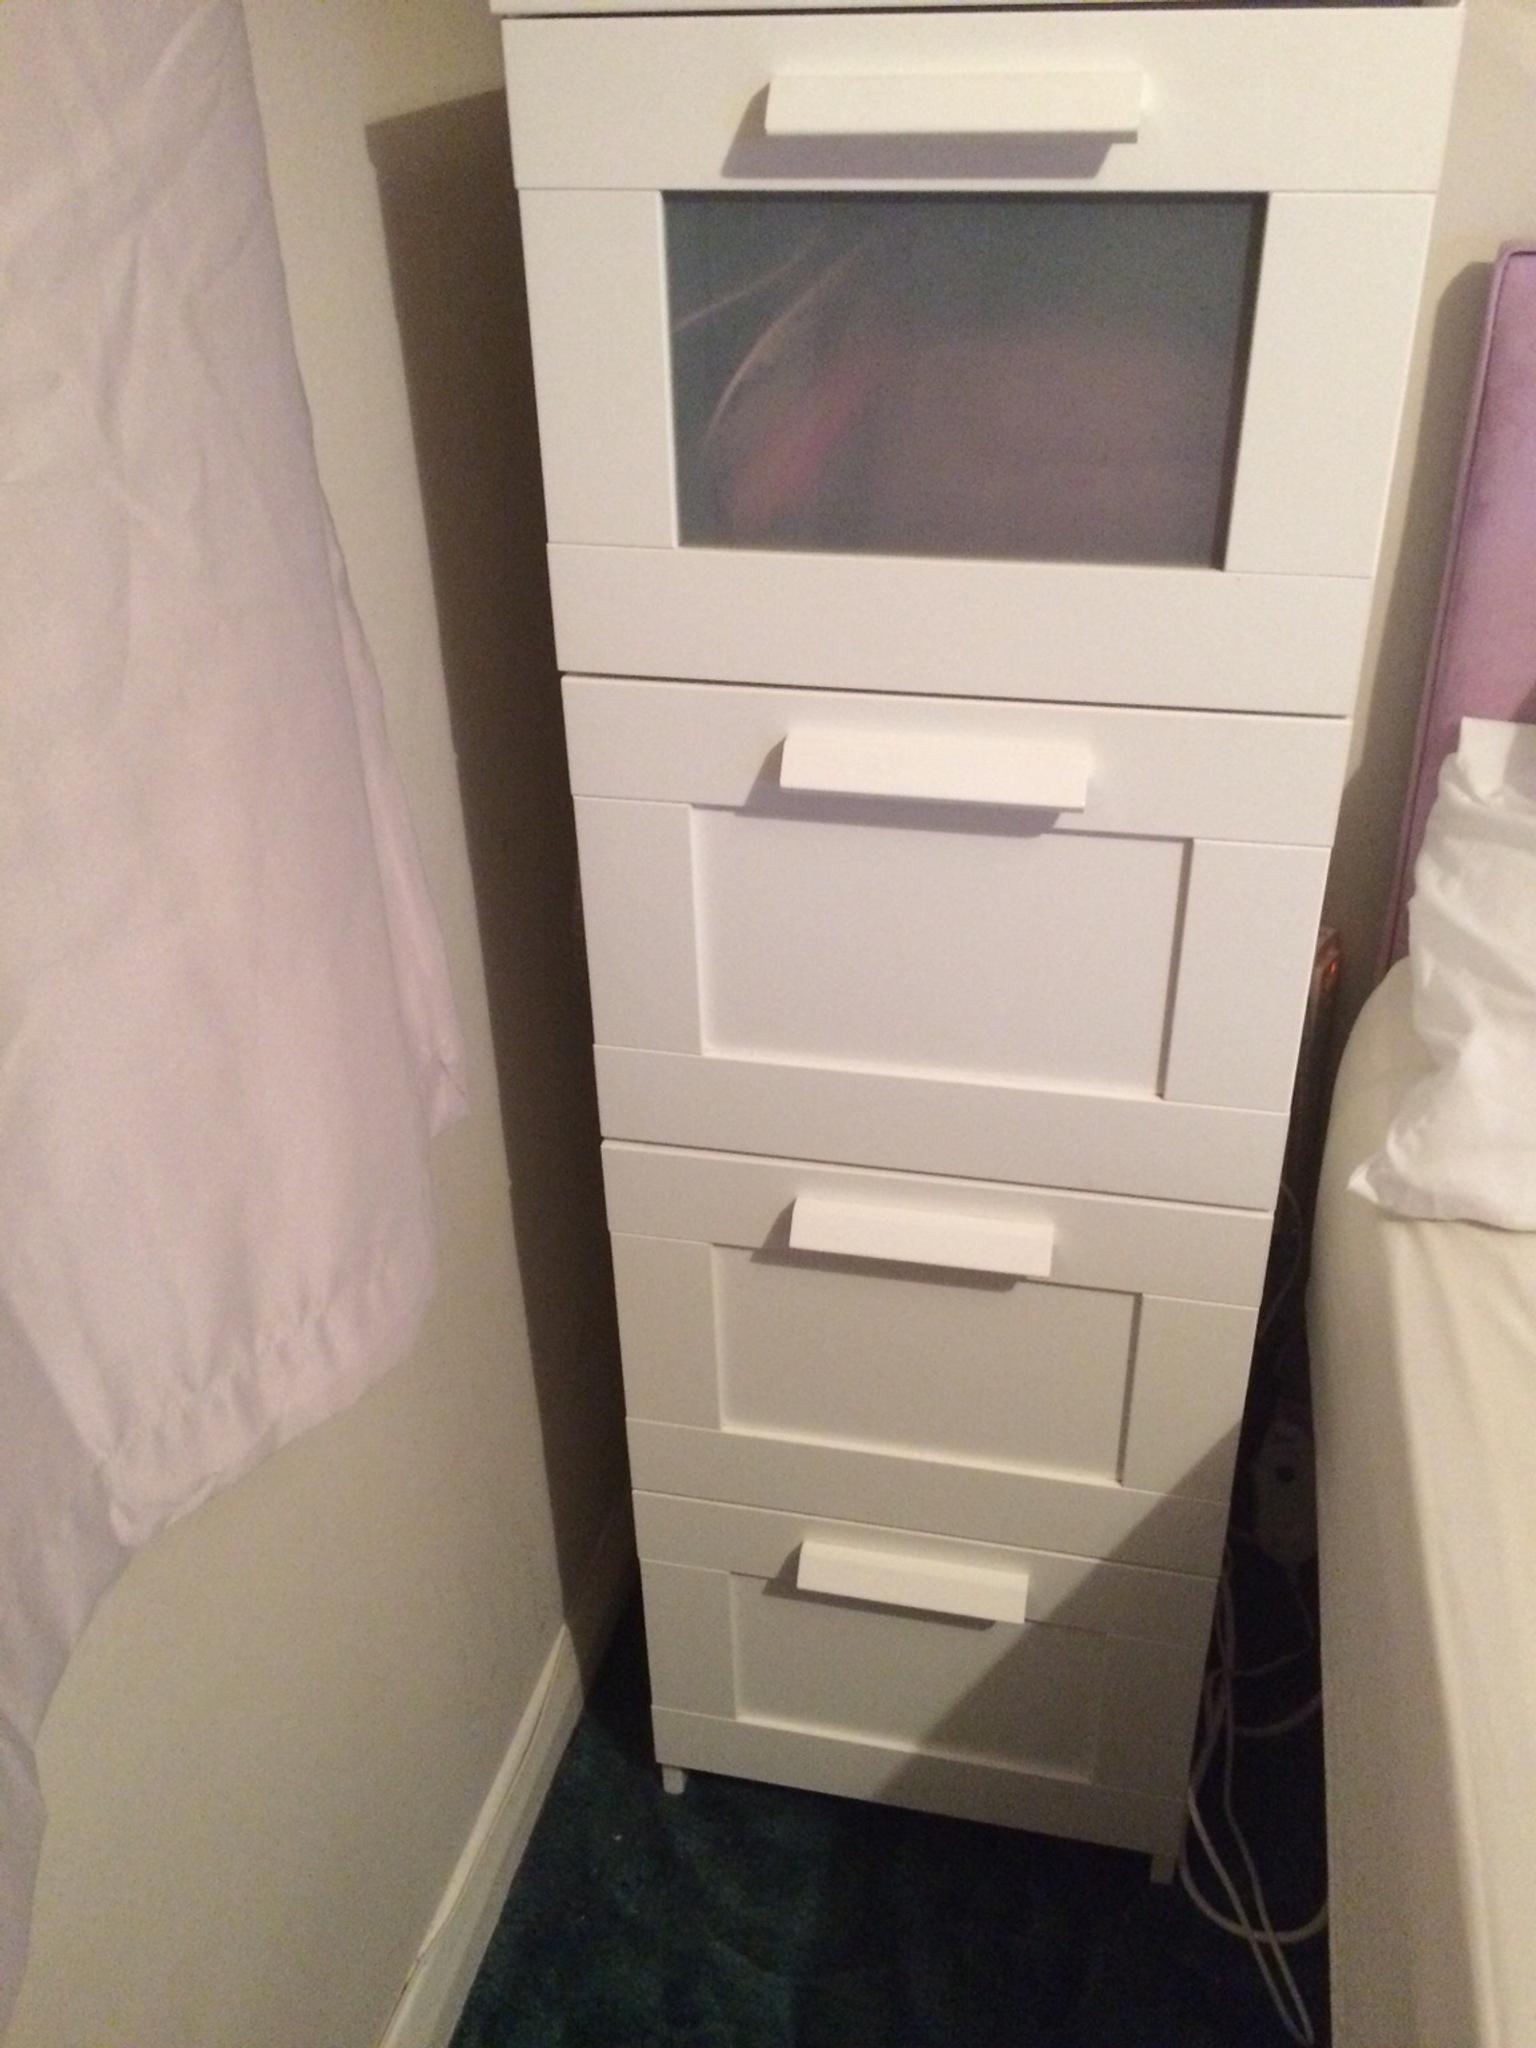 Ikea Brimnes 4 Drawer Chest In Cm8 Witham For 45 00 For Sale Shpock